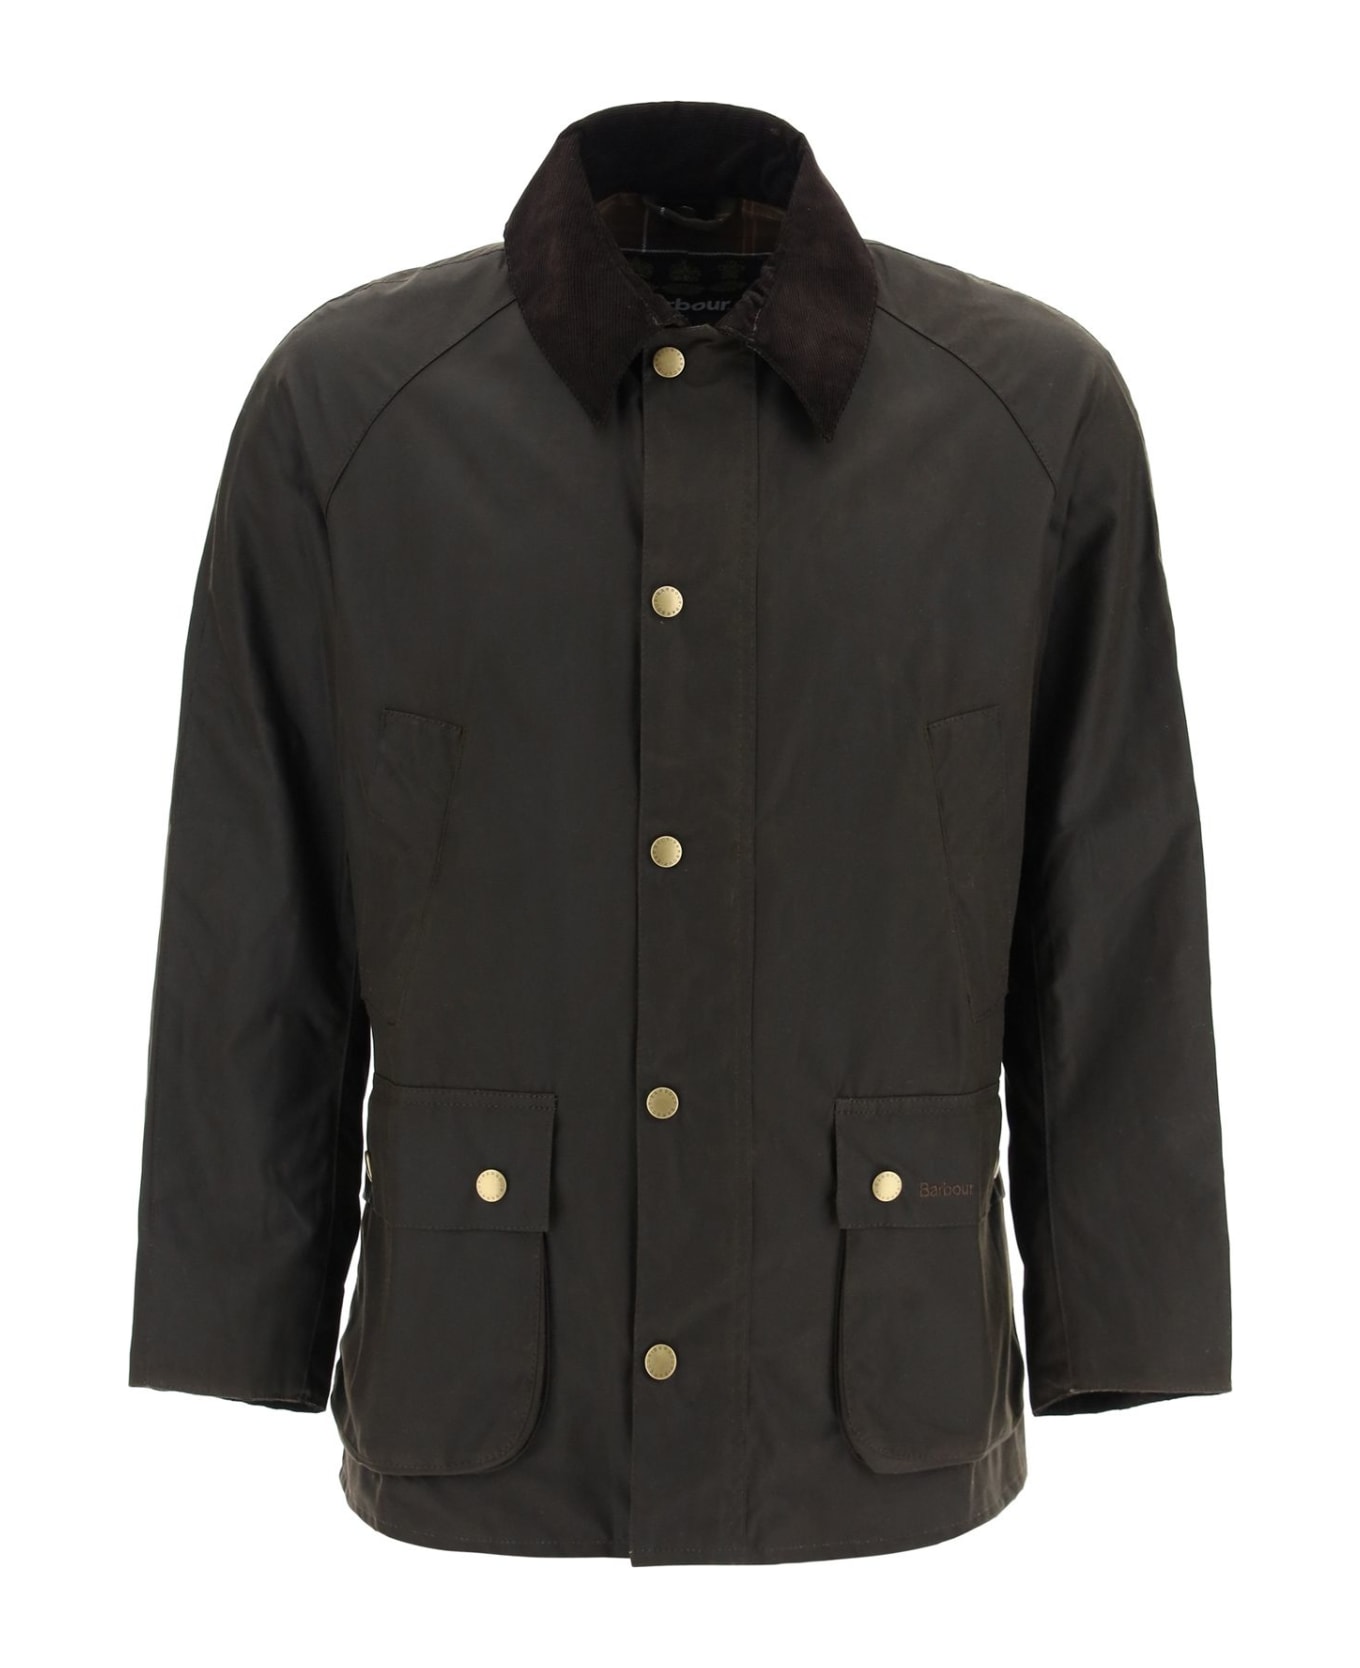 Barbour Ashby Wax Waxed Cotton Jacket - brown コート